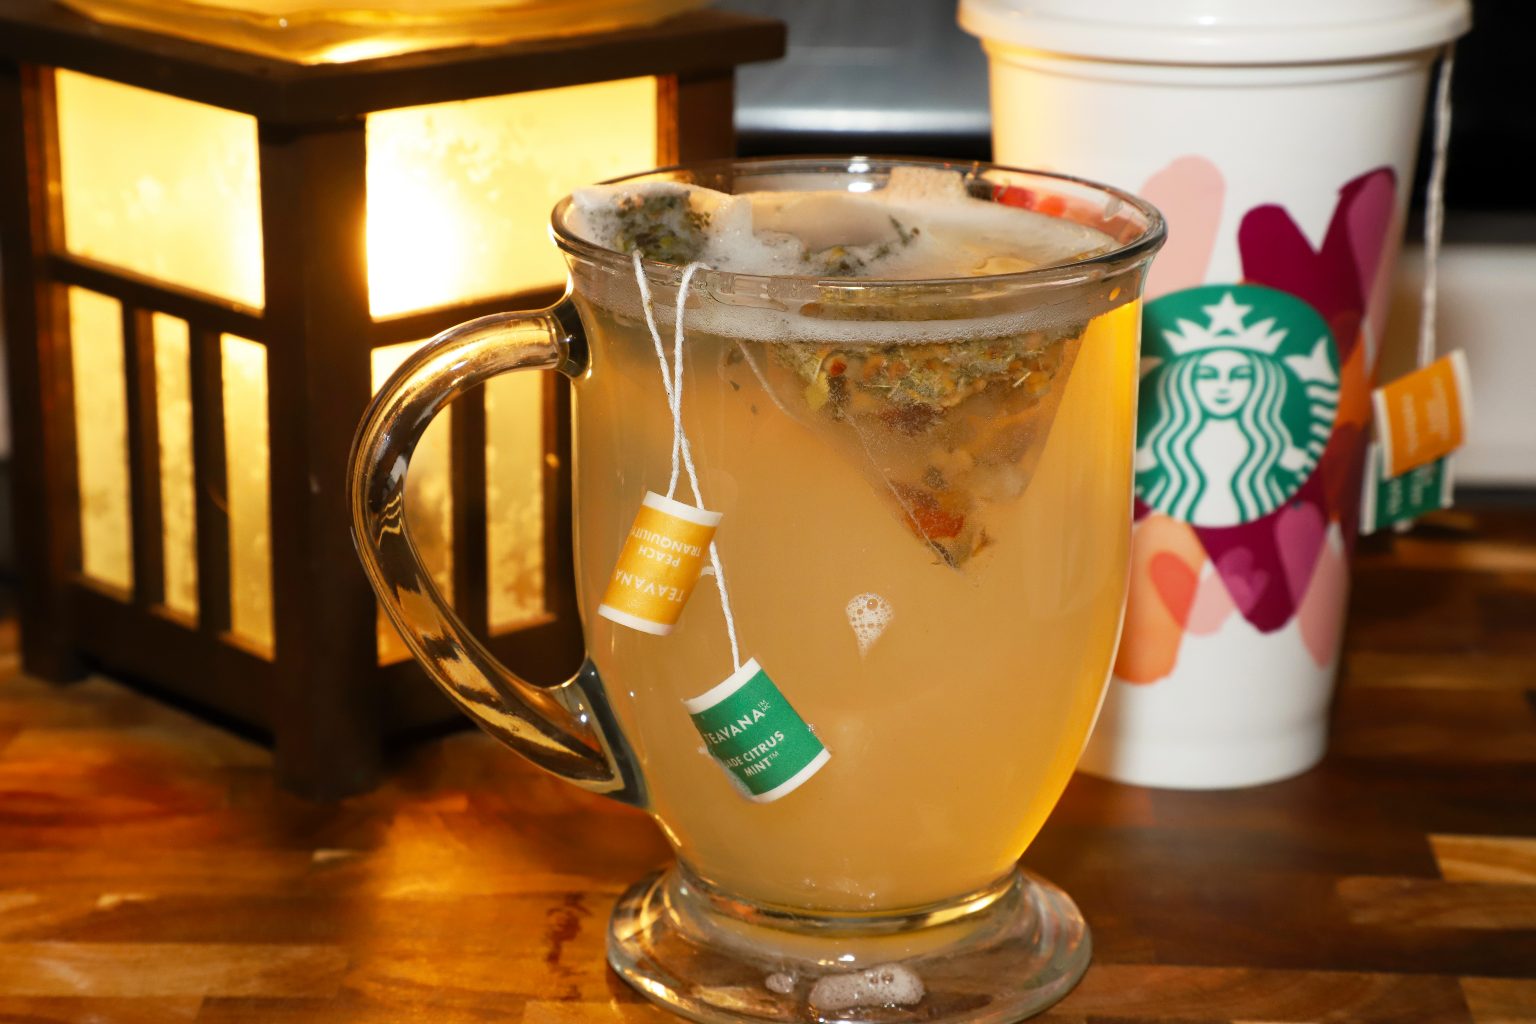 Can the Starbucks Medicine Ball Tea Actually Help with Cold Symptoms?